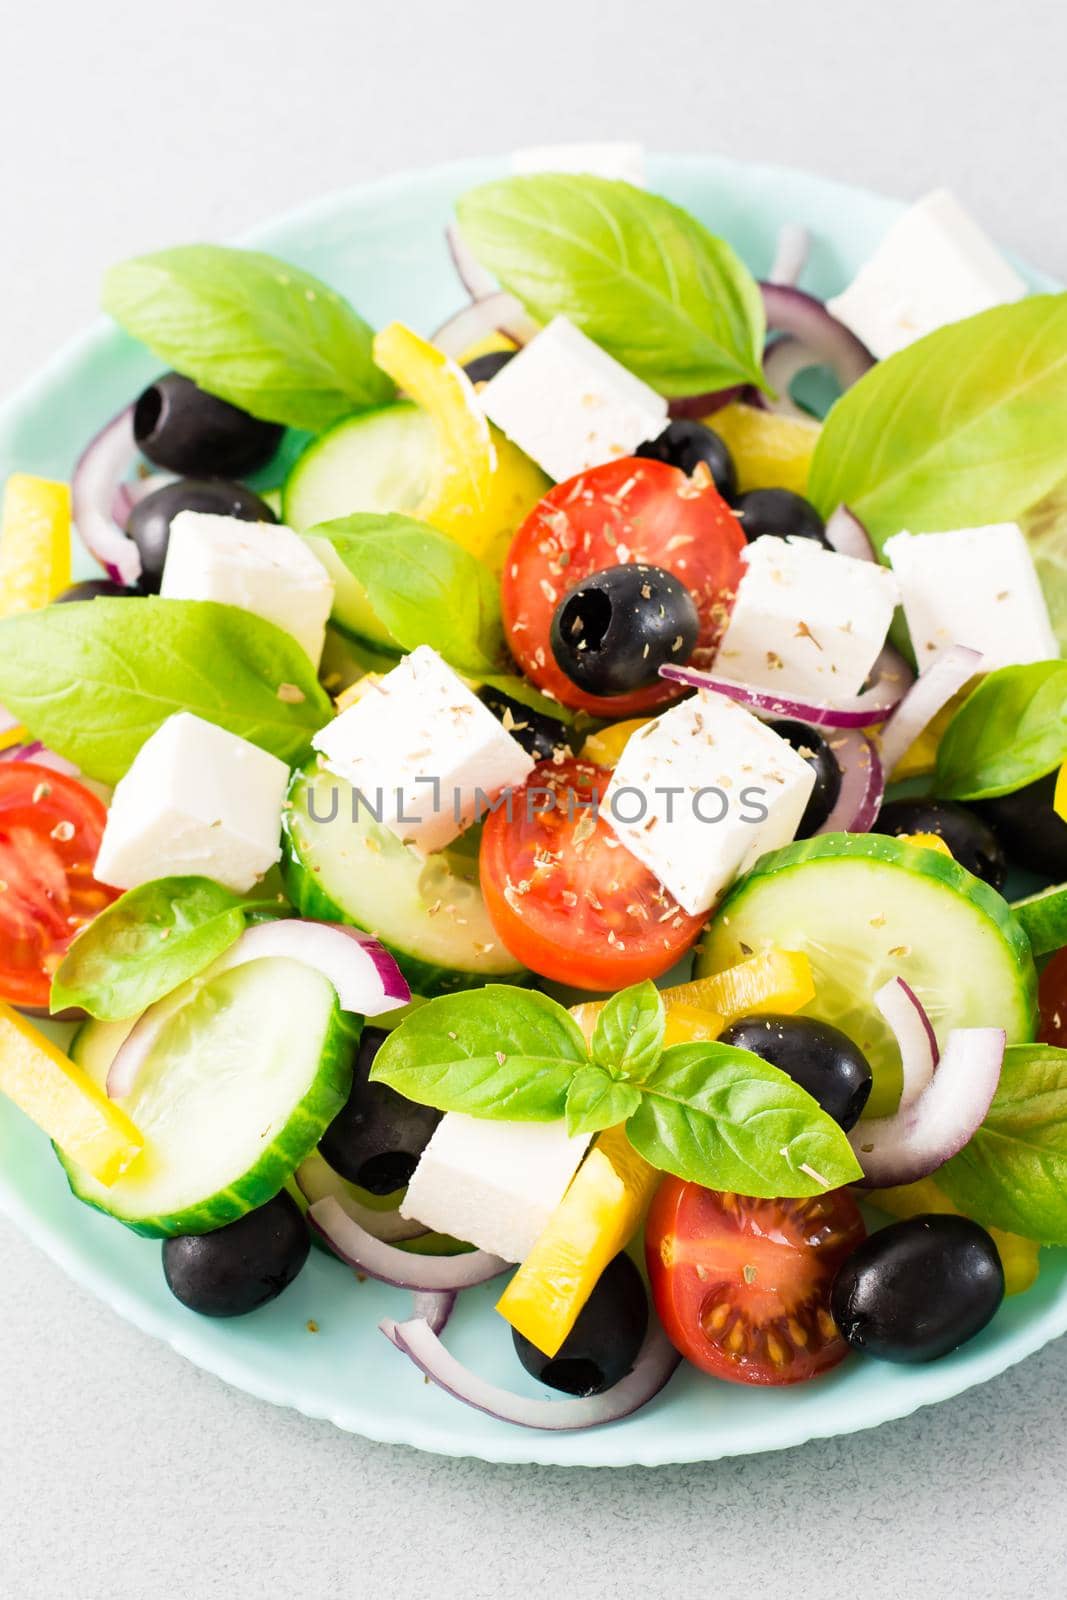 Fresh homemade greek salad with basil leaves on a plate on the table. Domestic life. Vertical view. Close-up